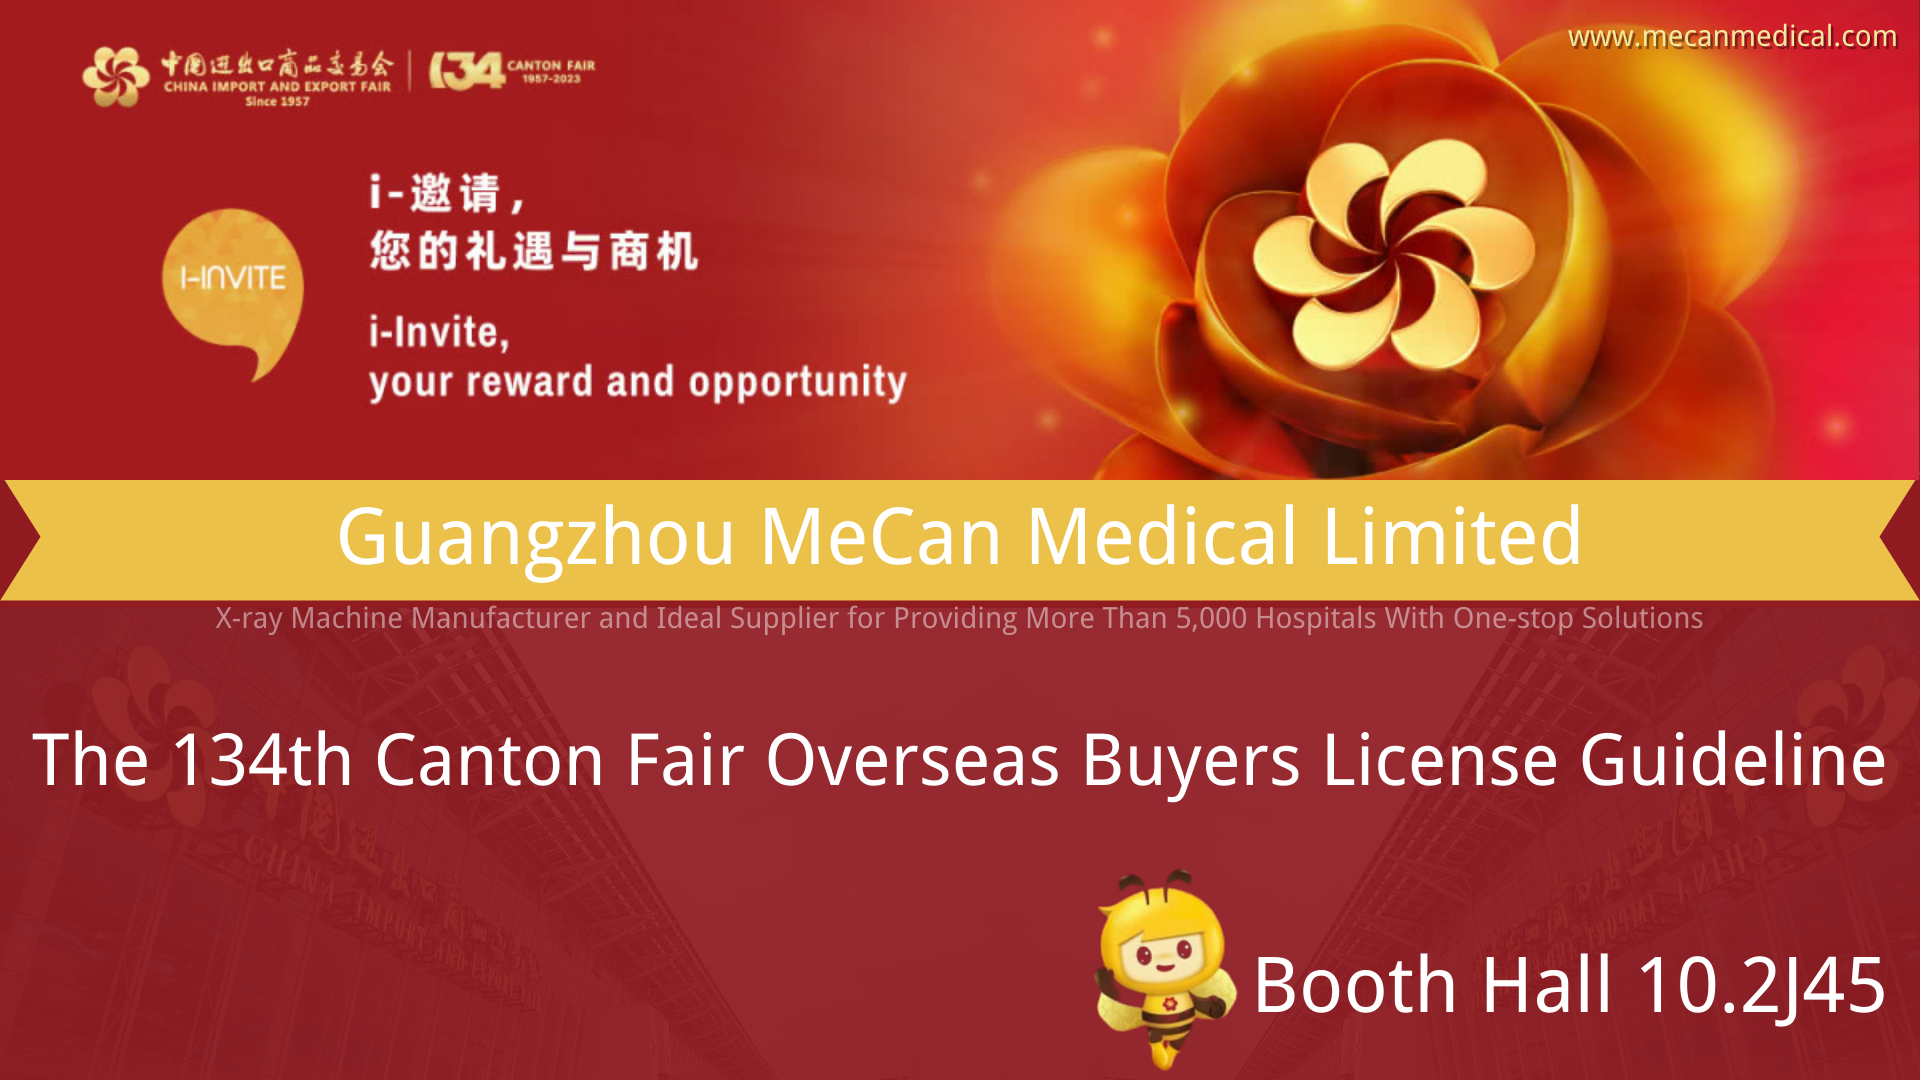 The 134th Canton Fair Overseas Buyers License Guideline